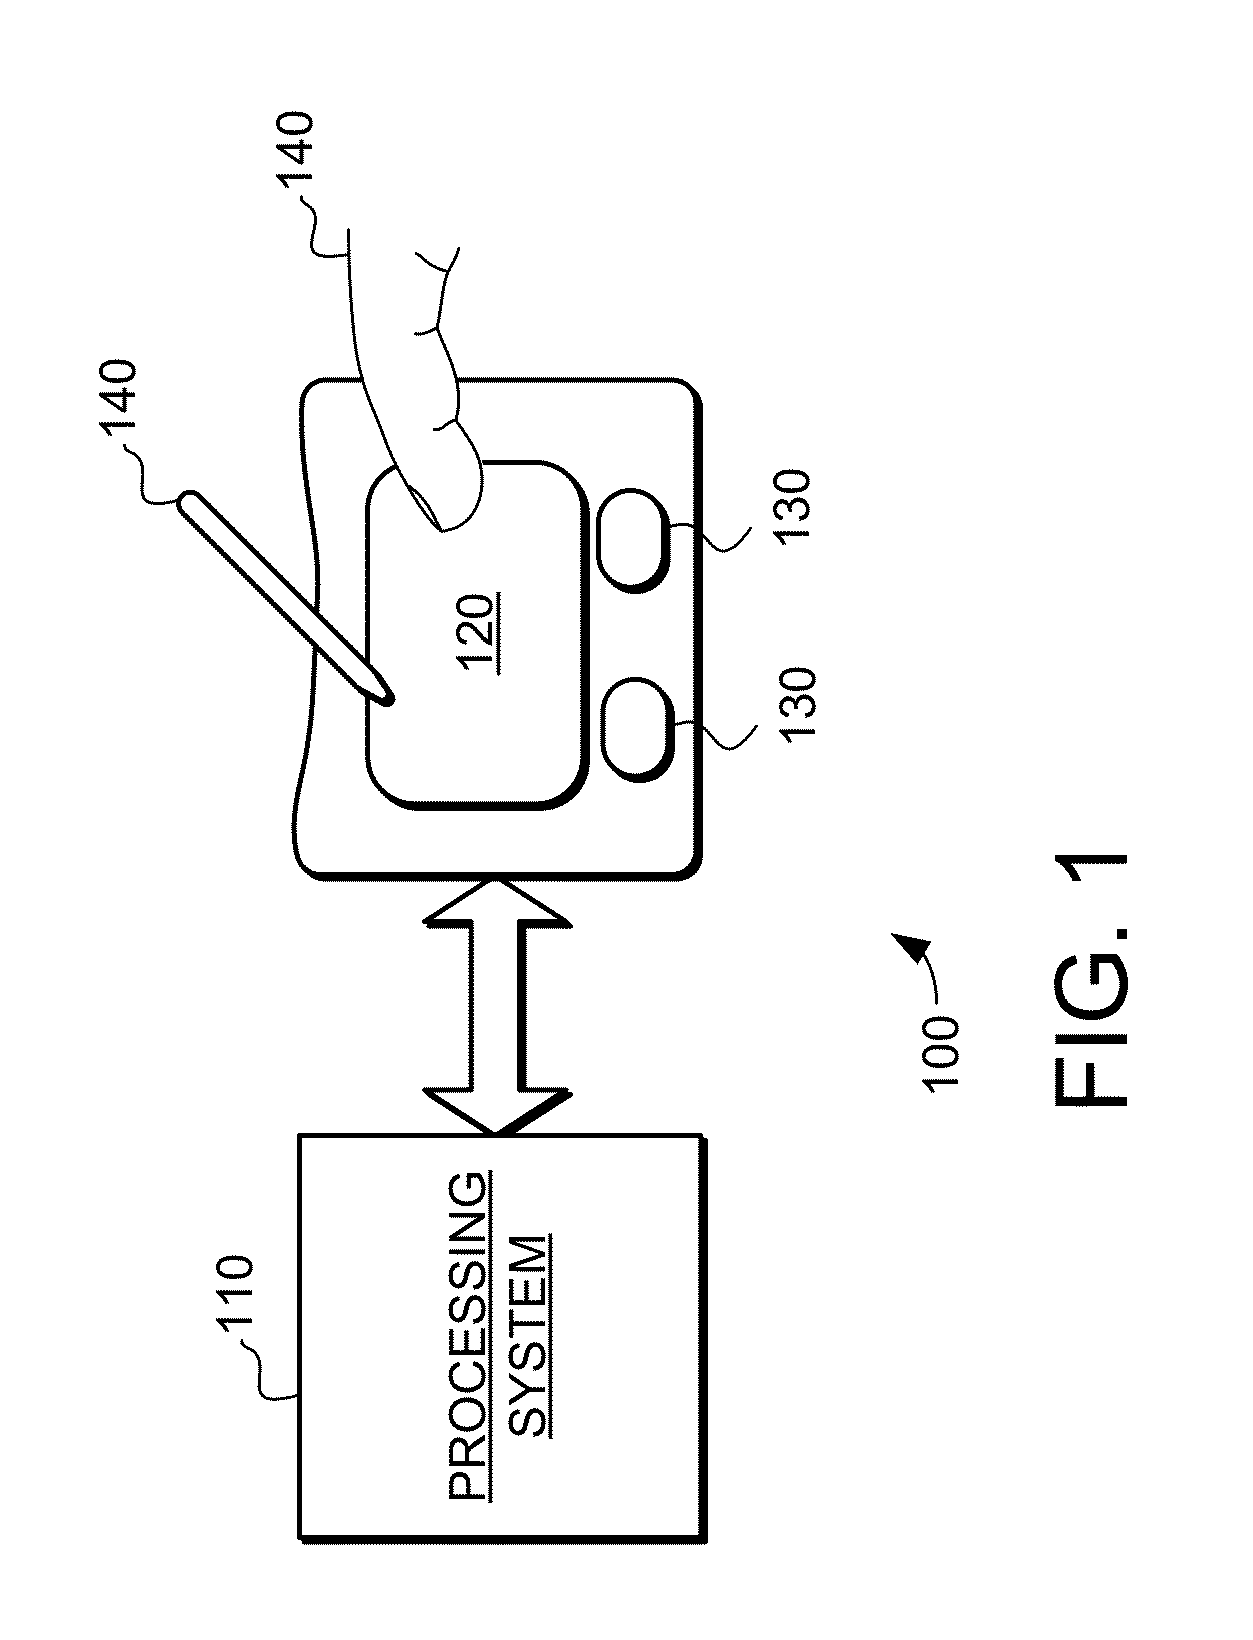 System and methods for determining object information using selectively floated electrodes